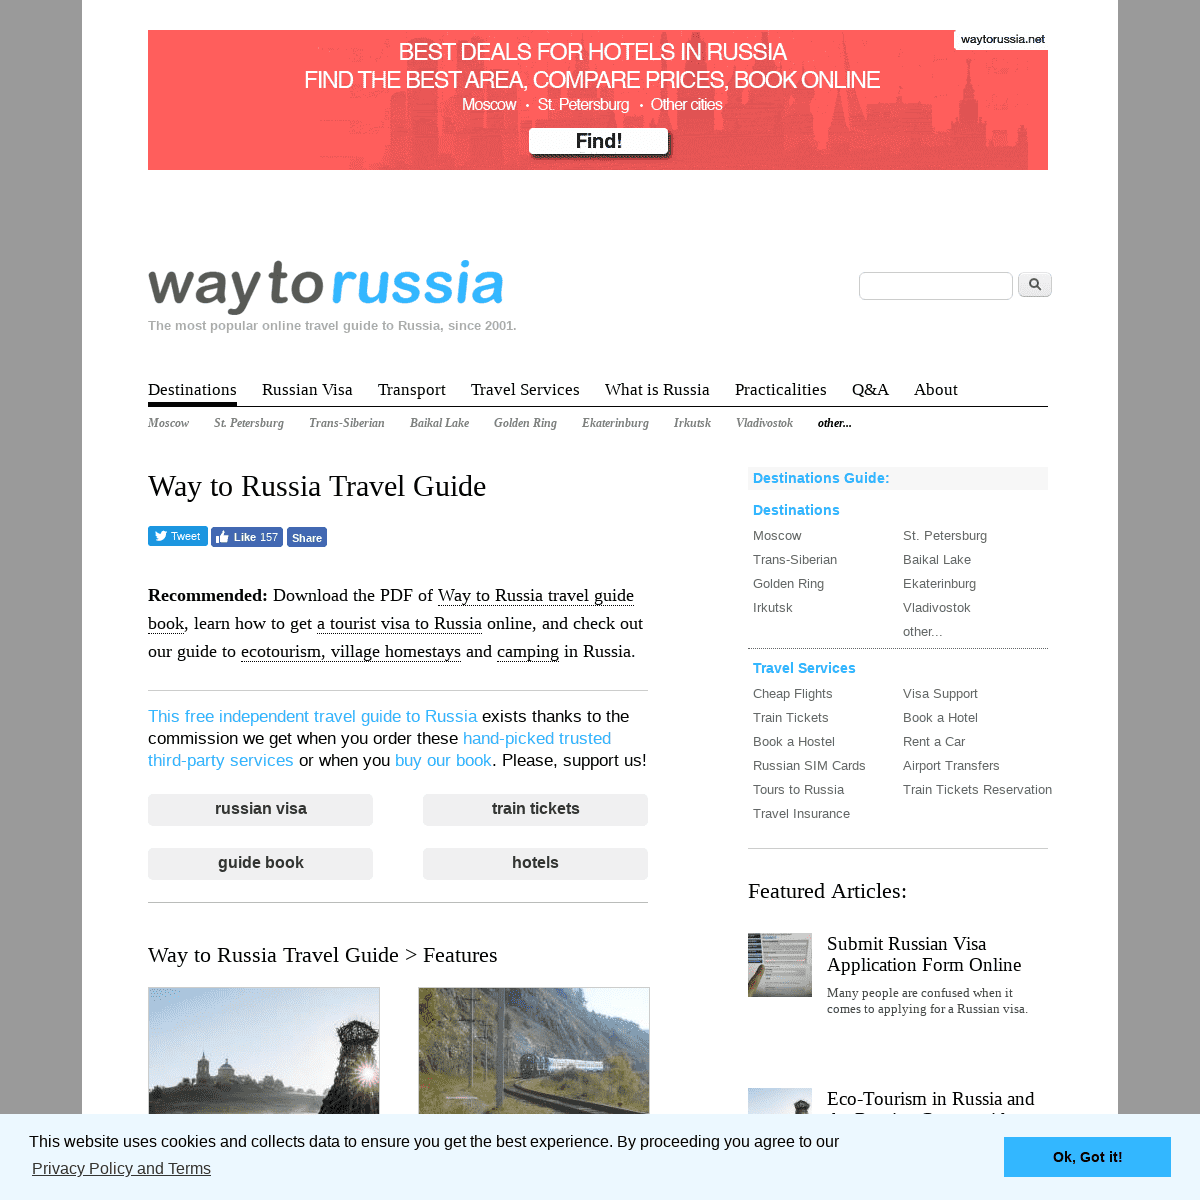 Way to Russia Travel Guide - City Guides, Russian Visas, Train Tickets